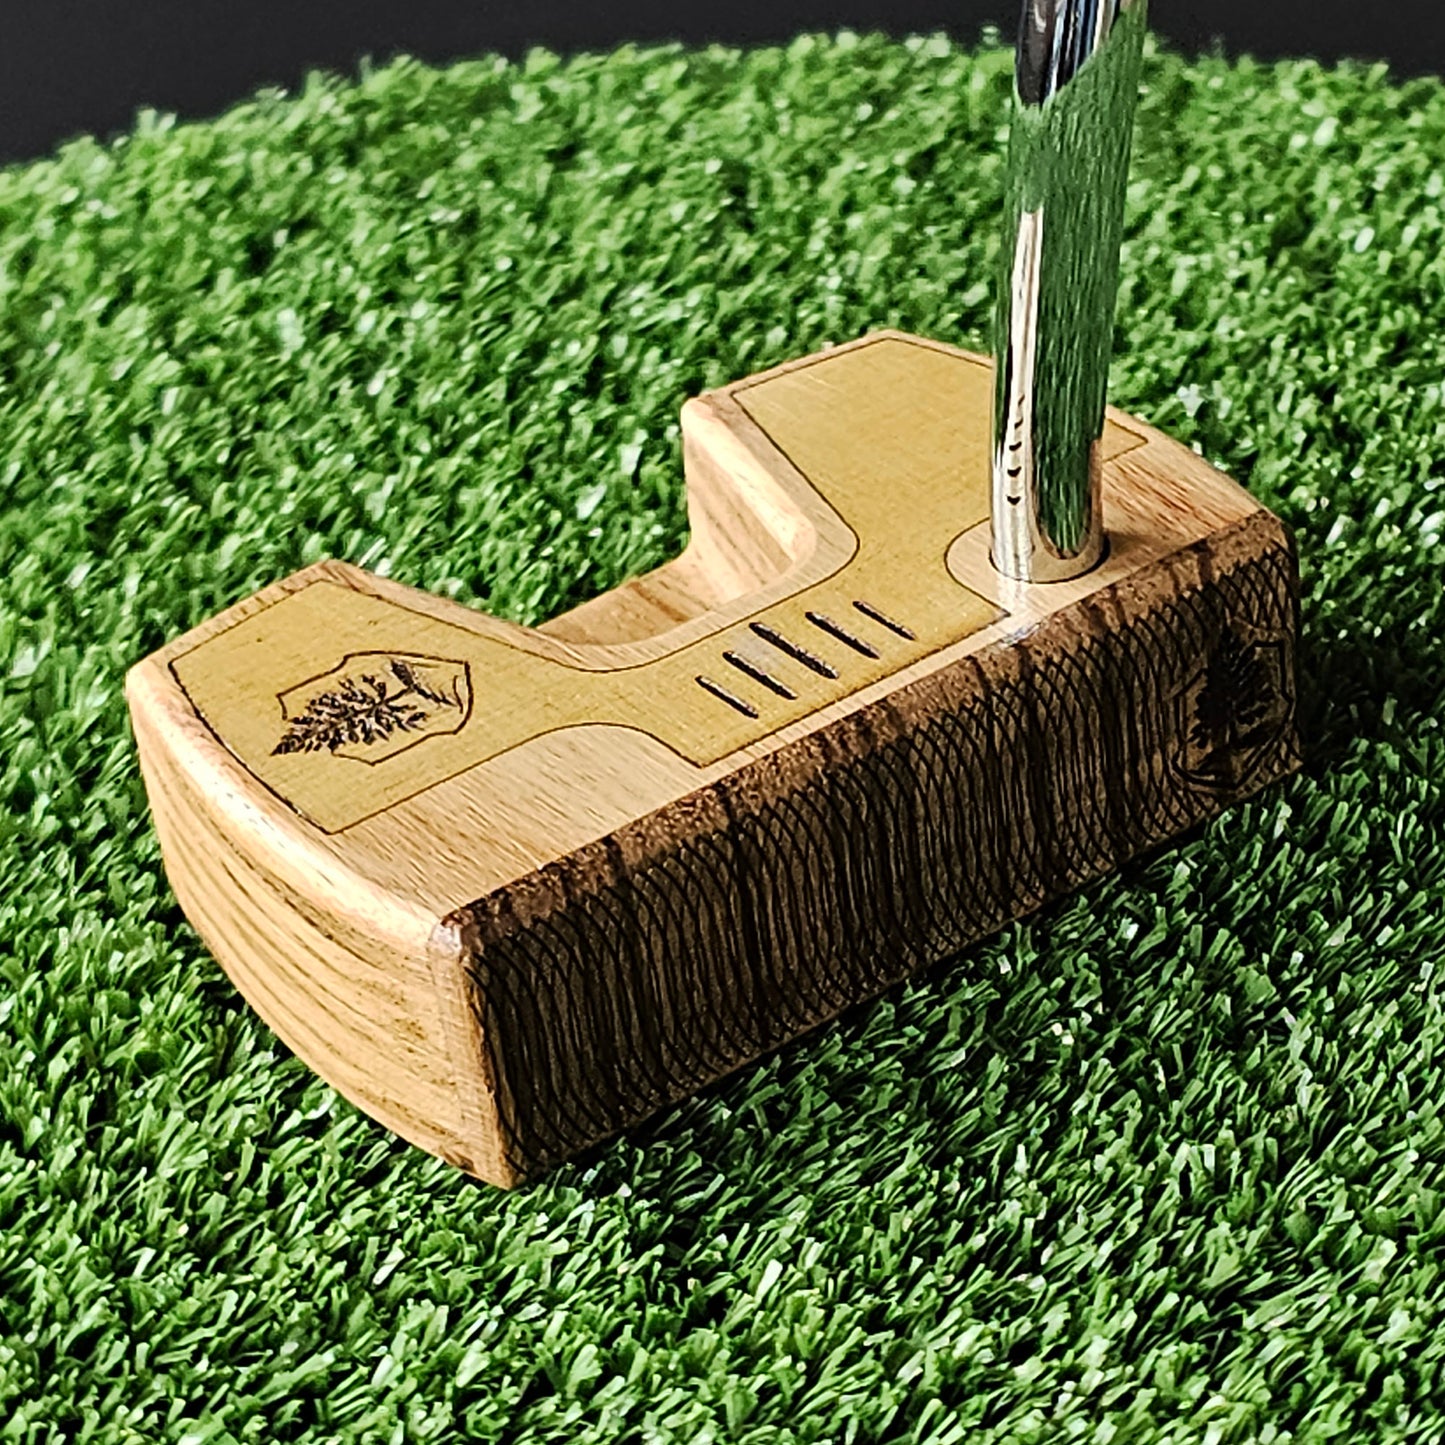 Zebrawood and Canarywood and Teak Woodrich Regal wood putter